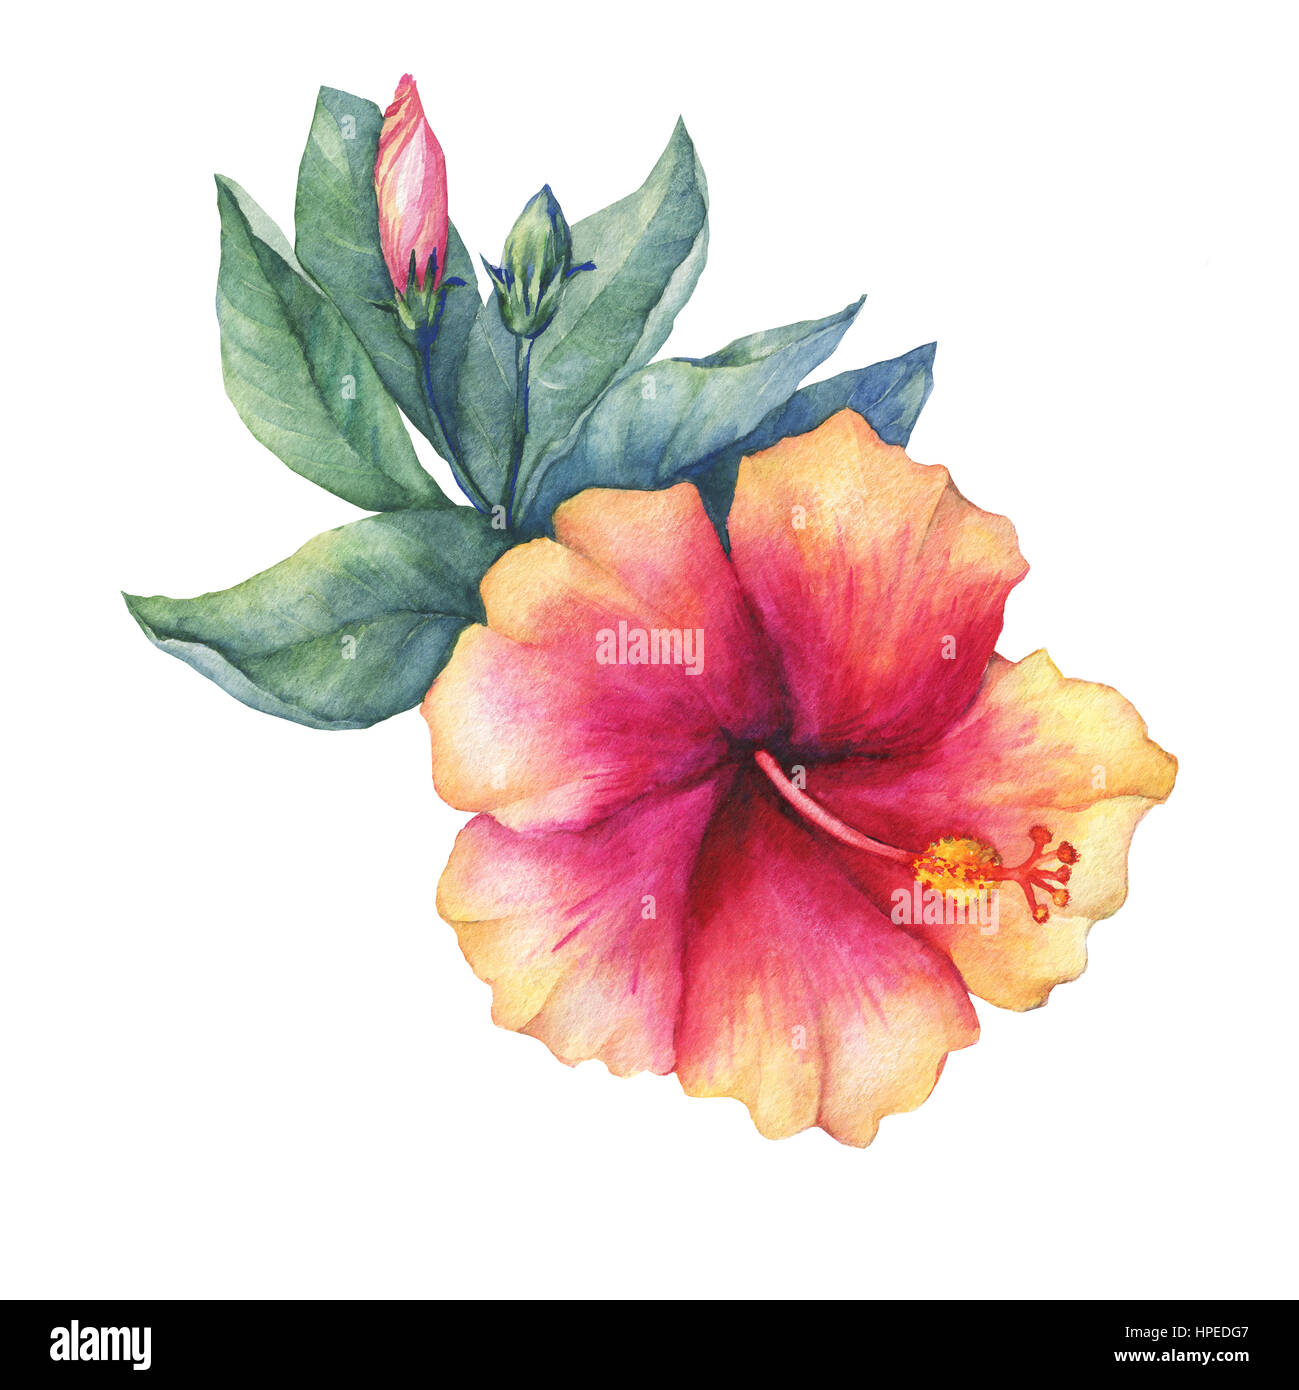 How To Draw A Hibiscus Flower Easy Step By Step - YouTube